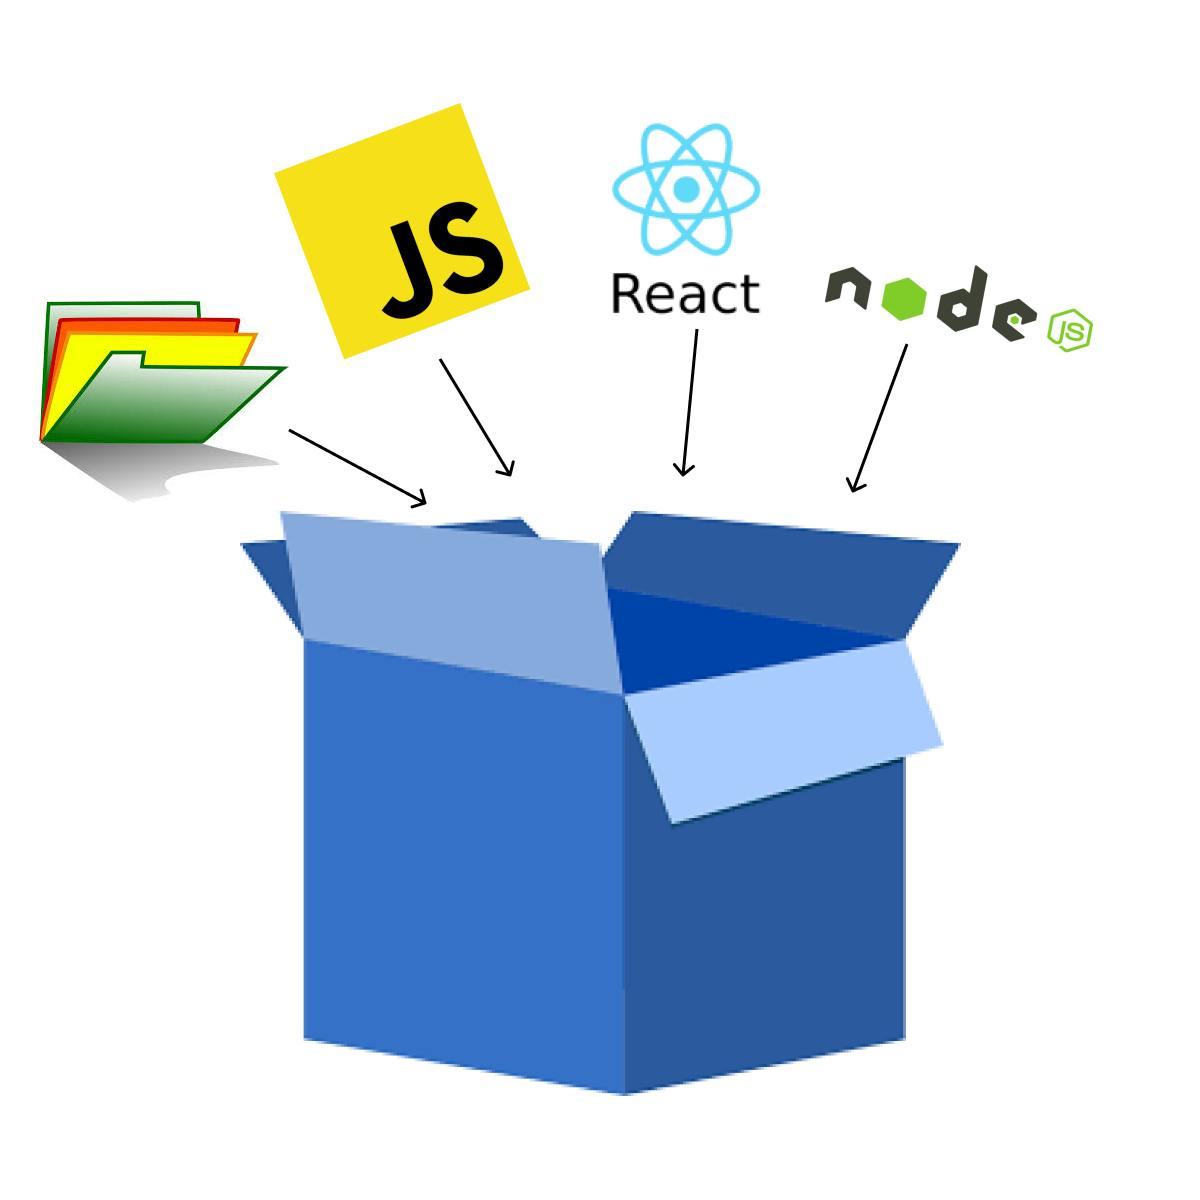 A box with Files, NodeJS, JavaScript, and React above it with arrows pointing towards the box